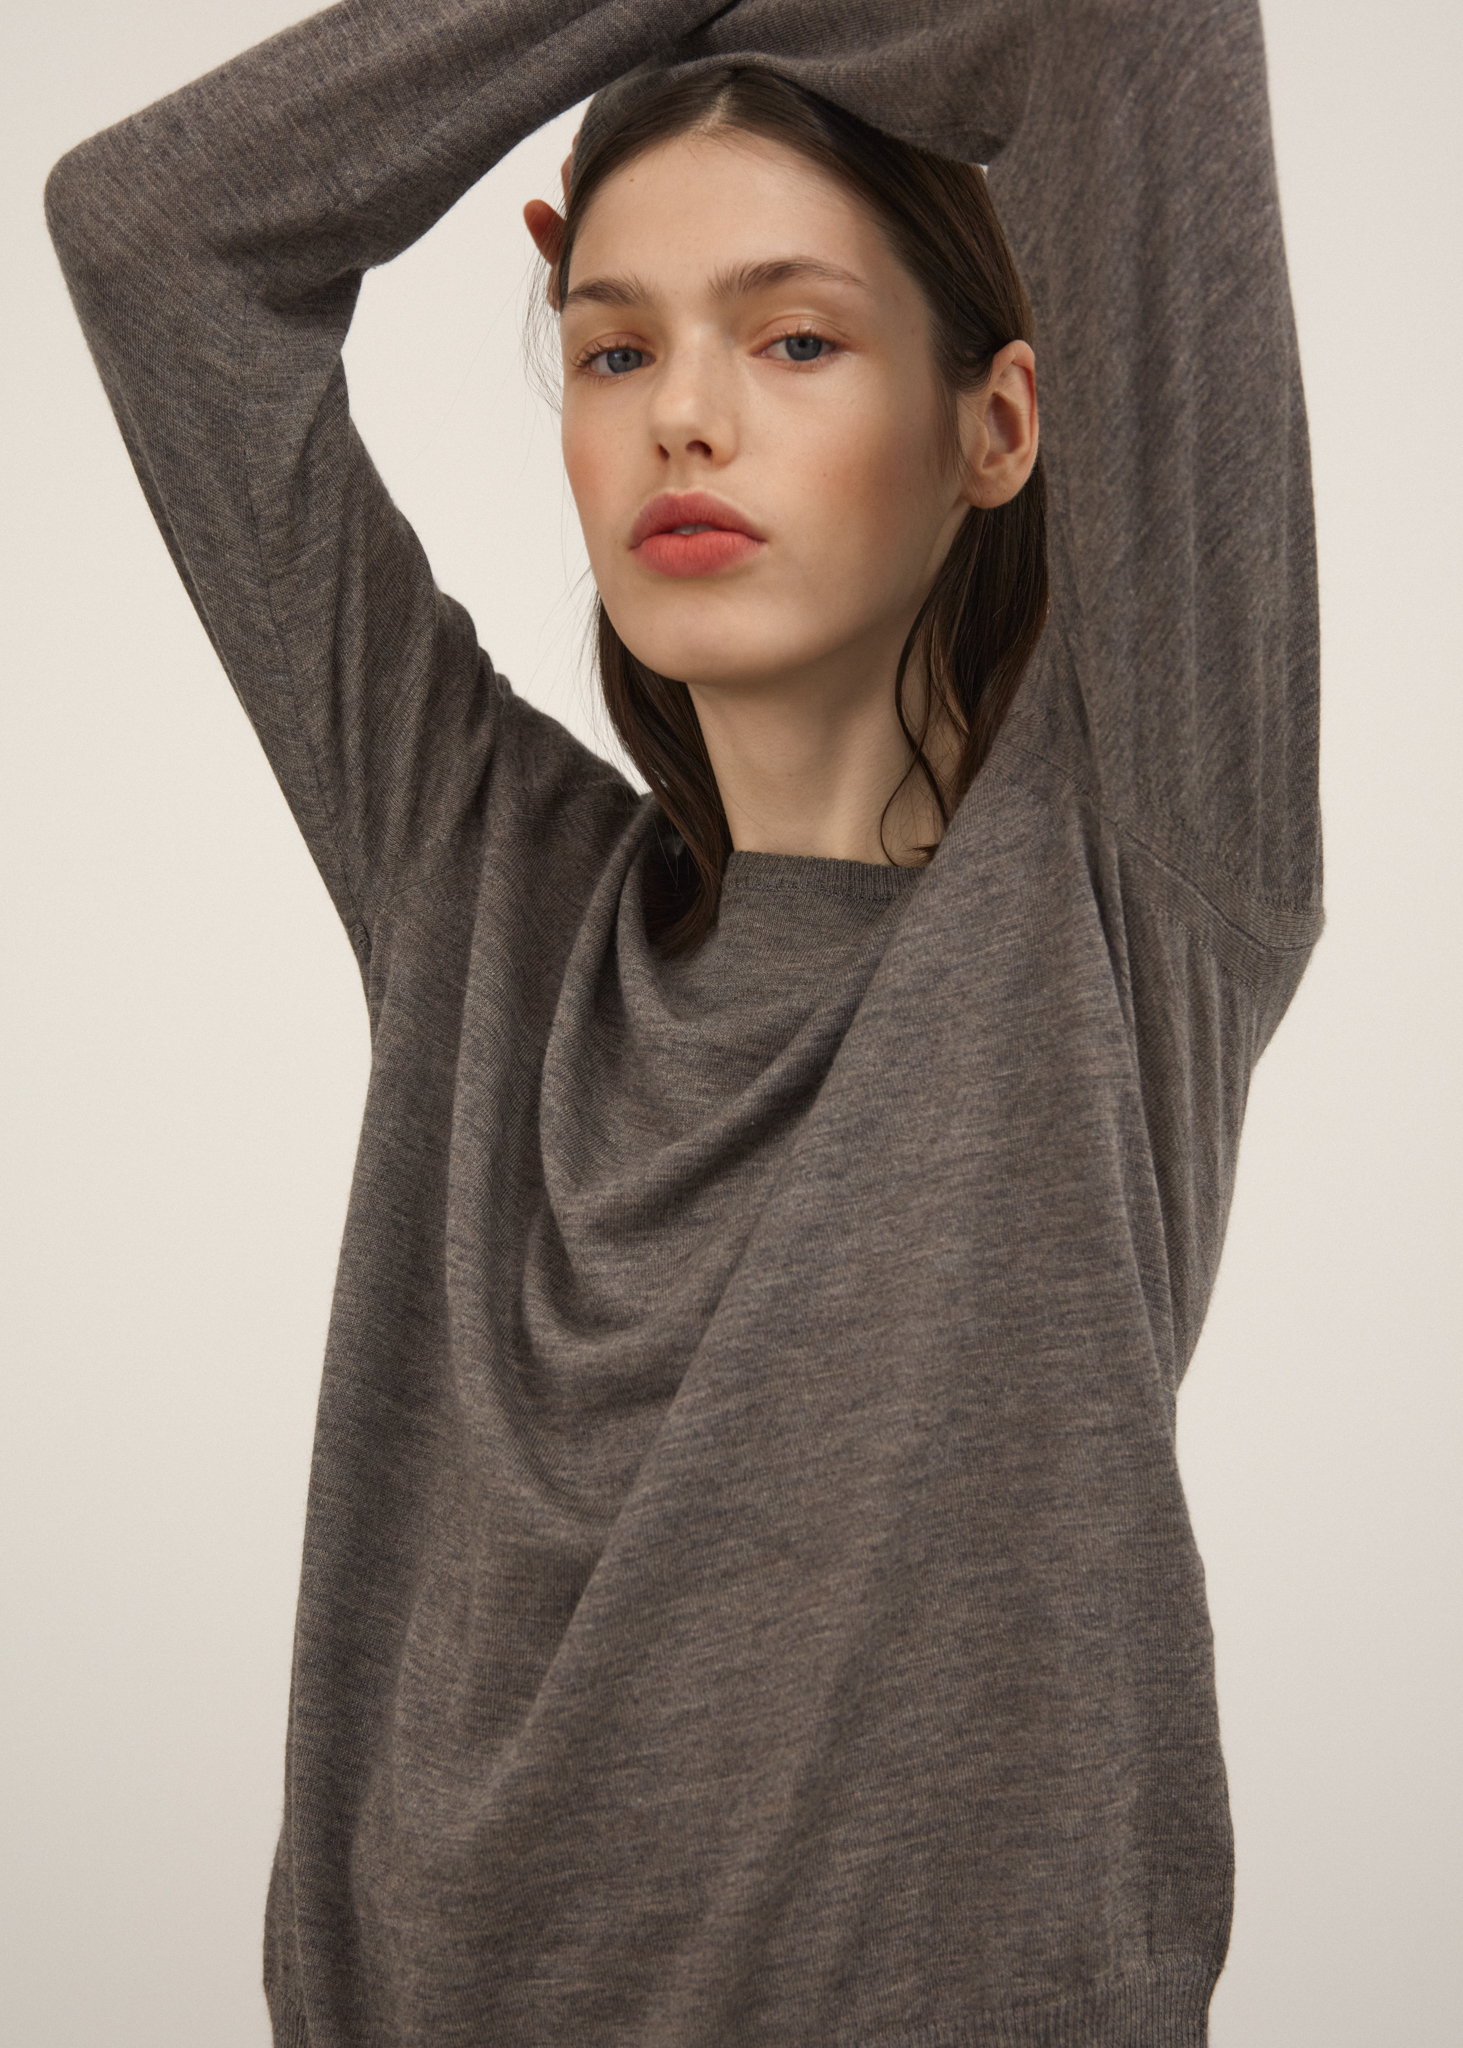 Knitwear - Guadalupe Cashmere 